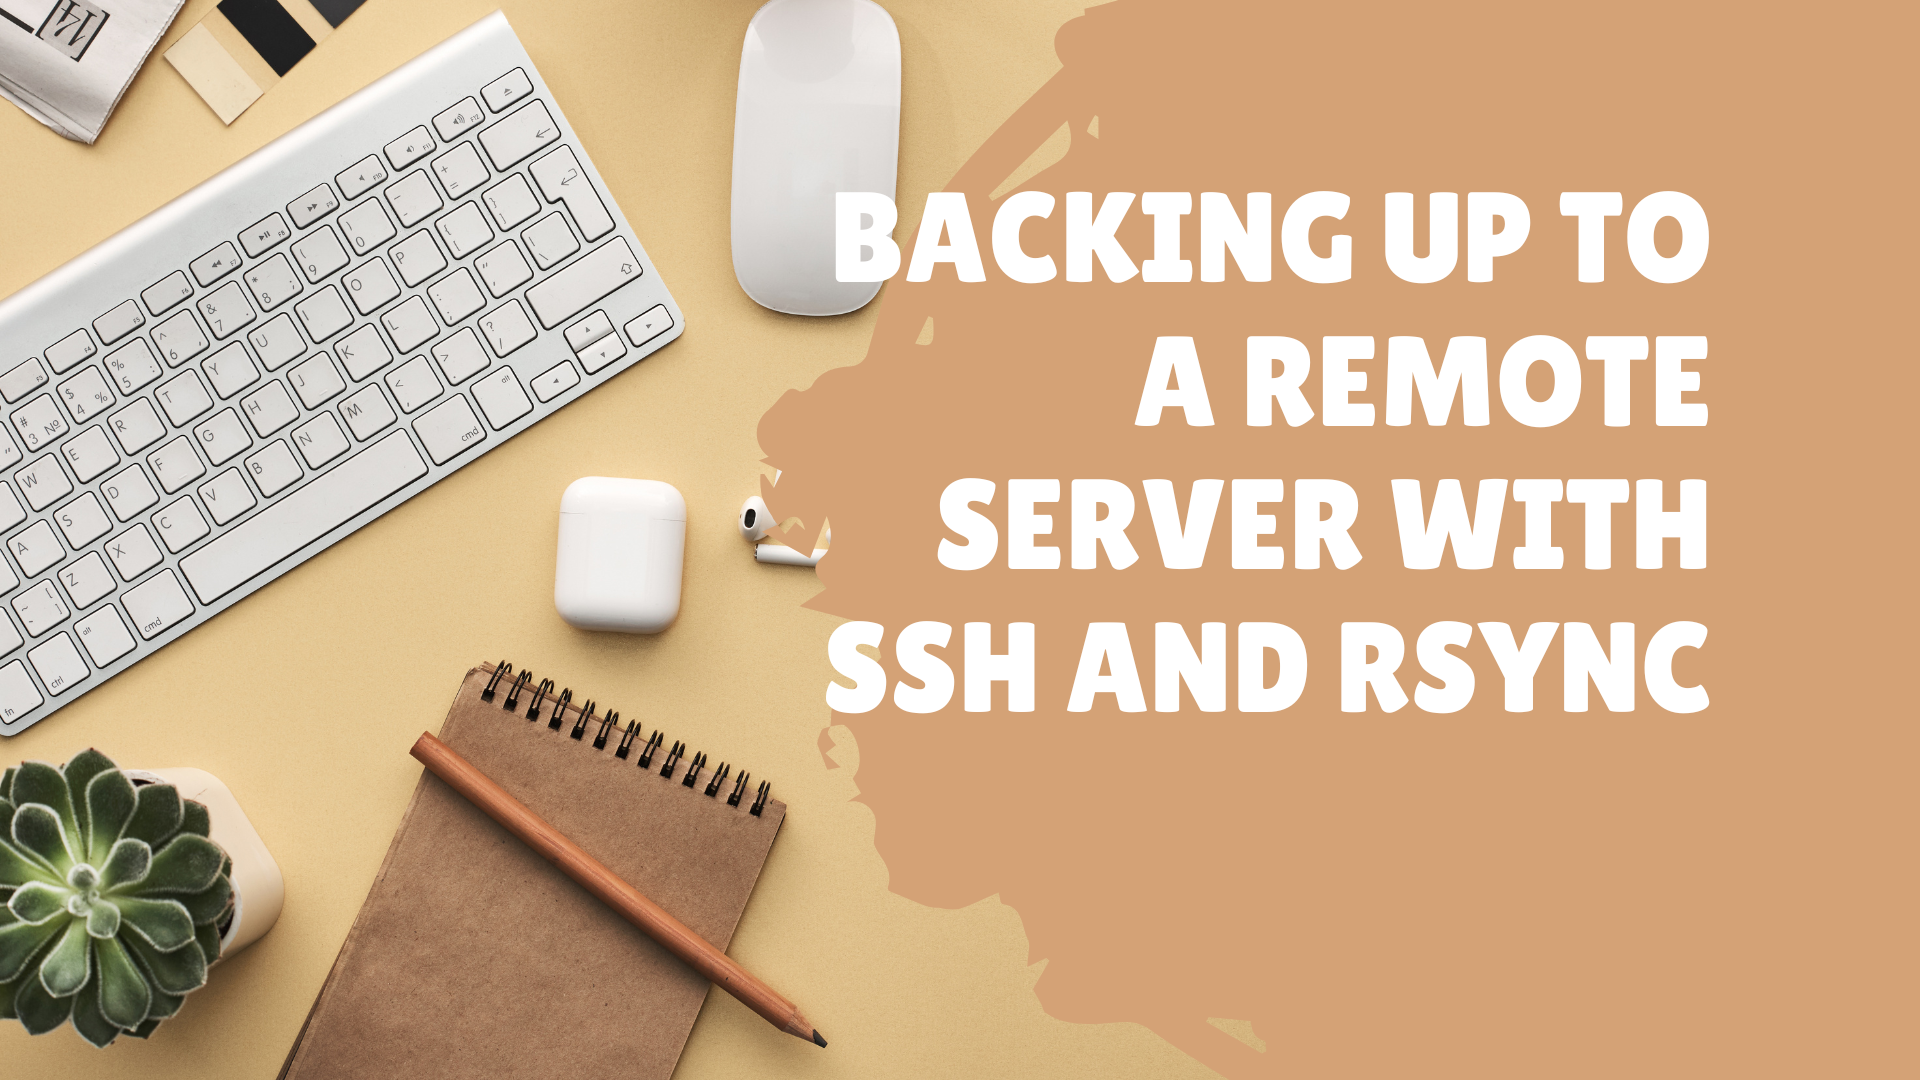 Backing up to a Remote Server with SSH and rsync